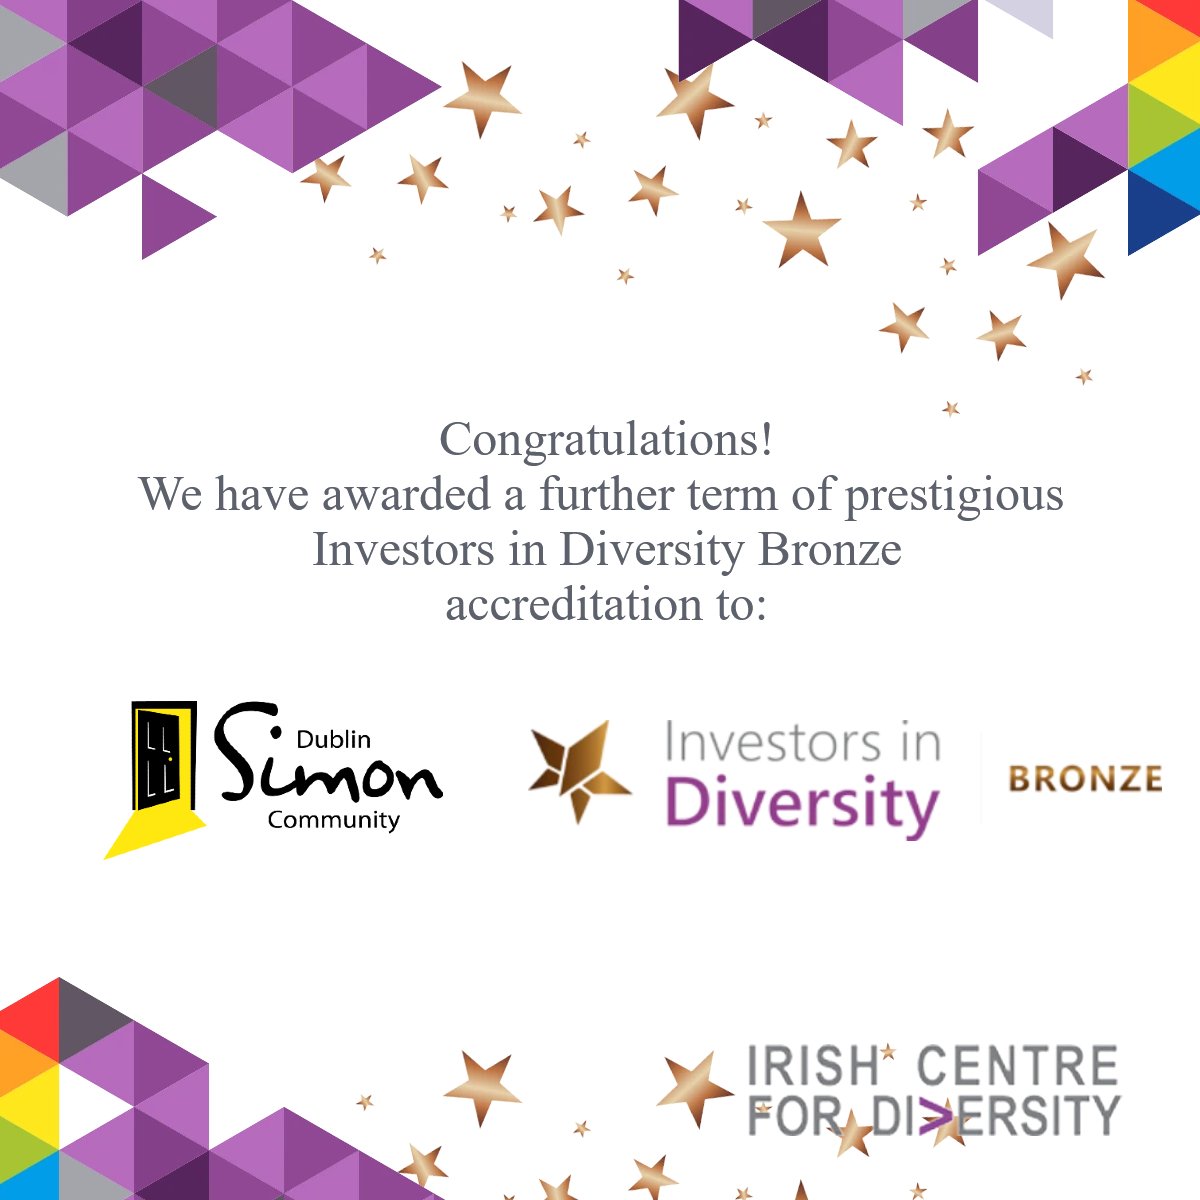 Congrats! @Dublin_Simon working to prevent & address homelessness, has been presented with a further term of #InvestorsinDiversity Bronze - Ireland’s premier #DiversityandInclusion accreditation. We look forward to sharing their further progress #CelebrateDiversity